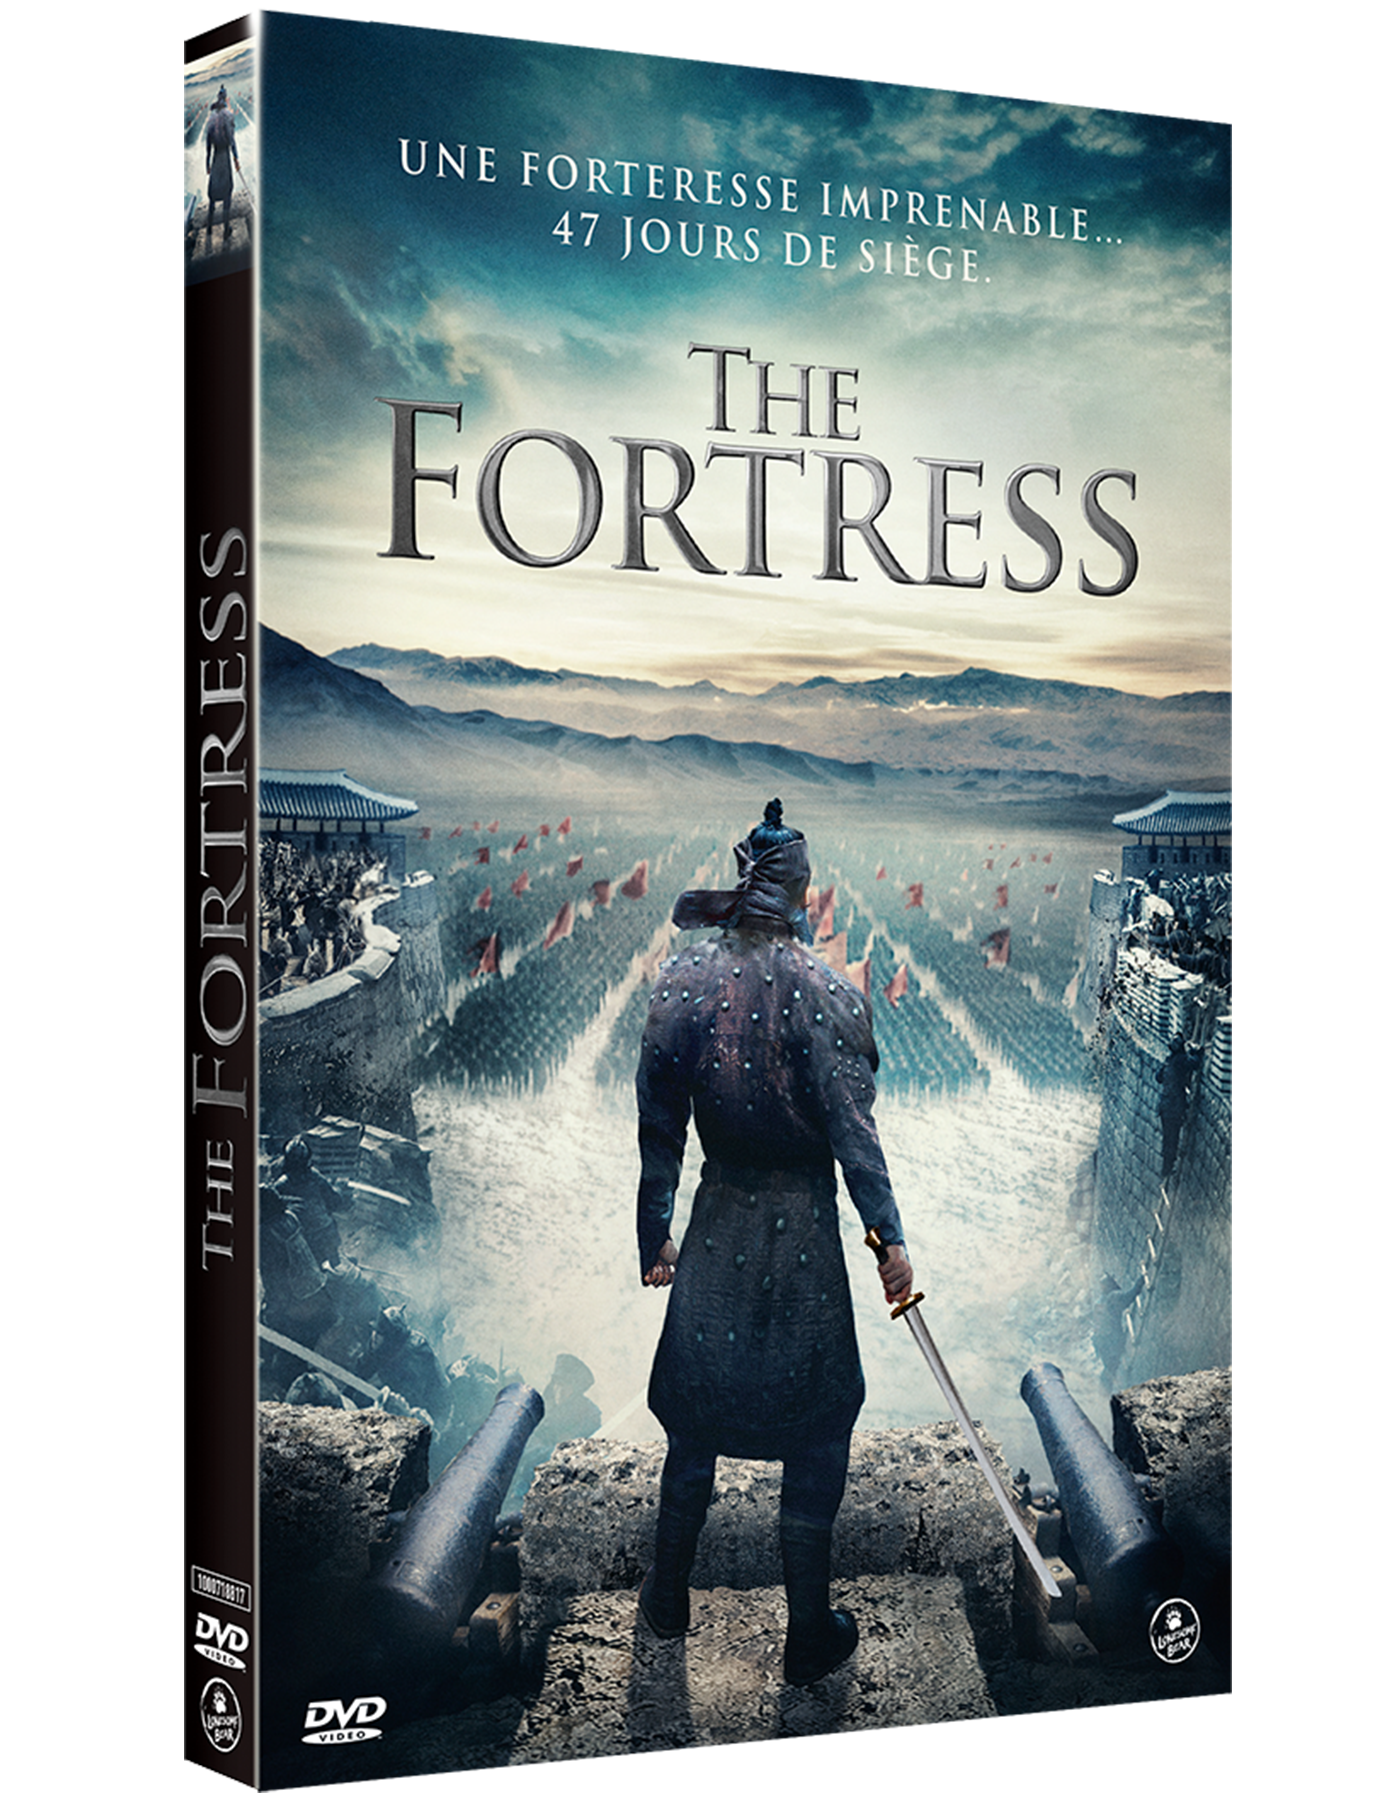 DVD "The Fortress"